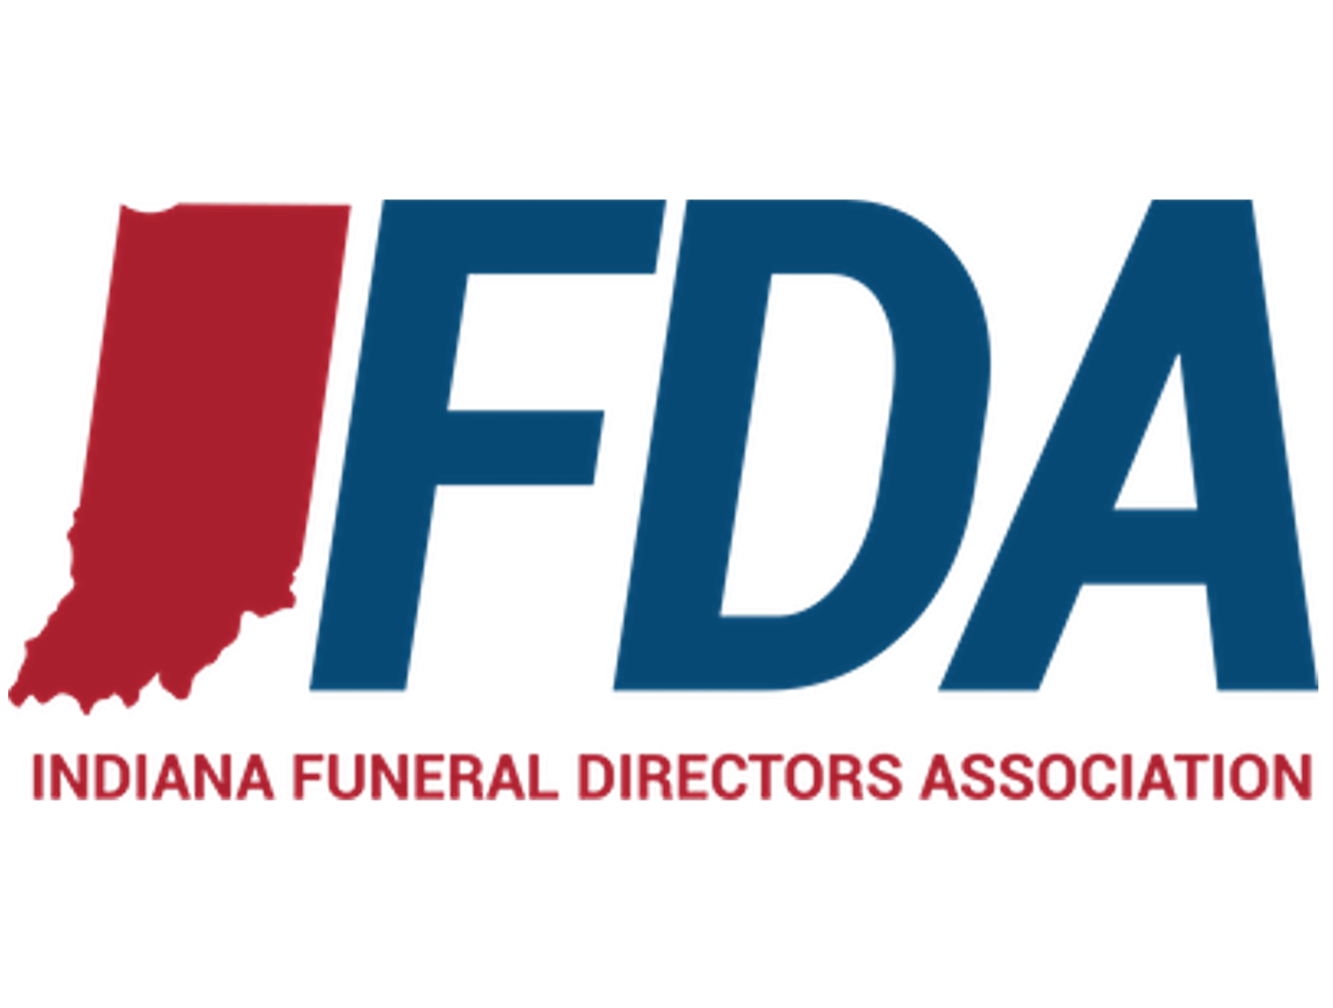 The annual transition of IFDA leadership